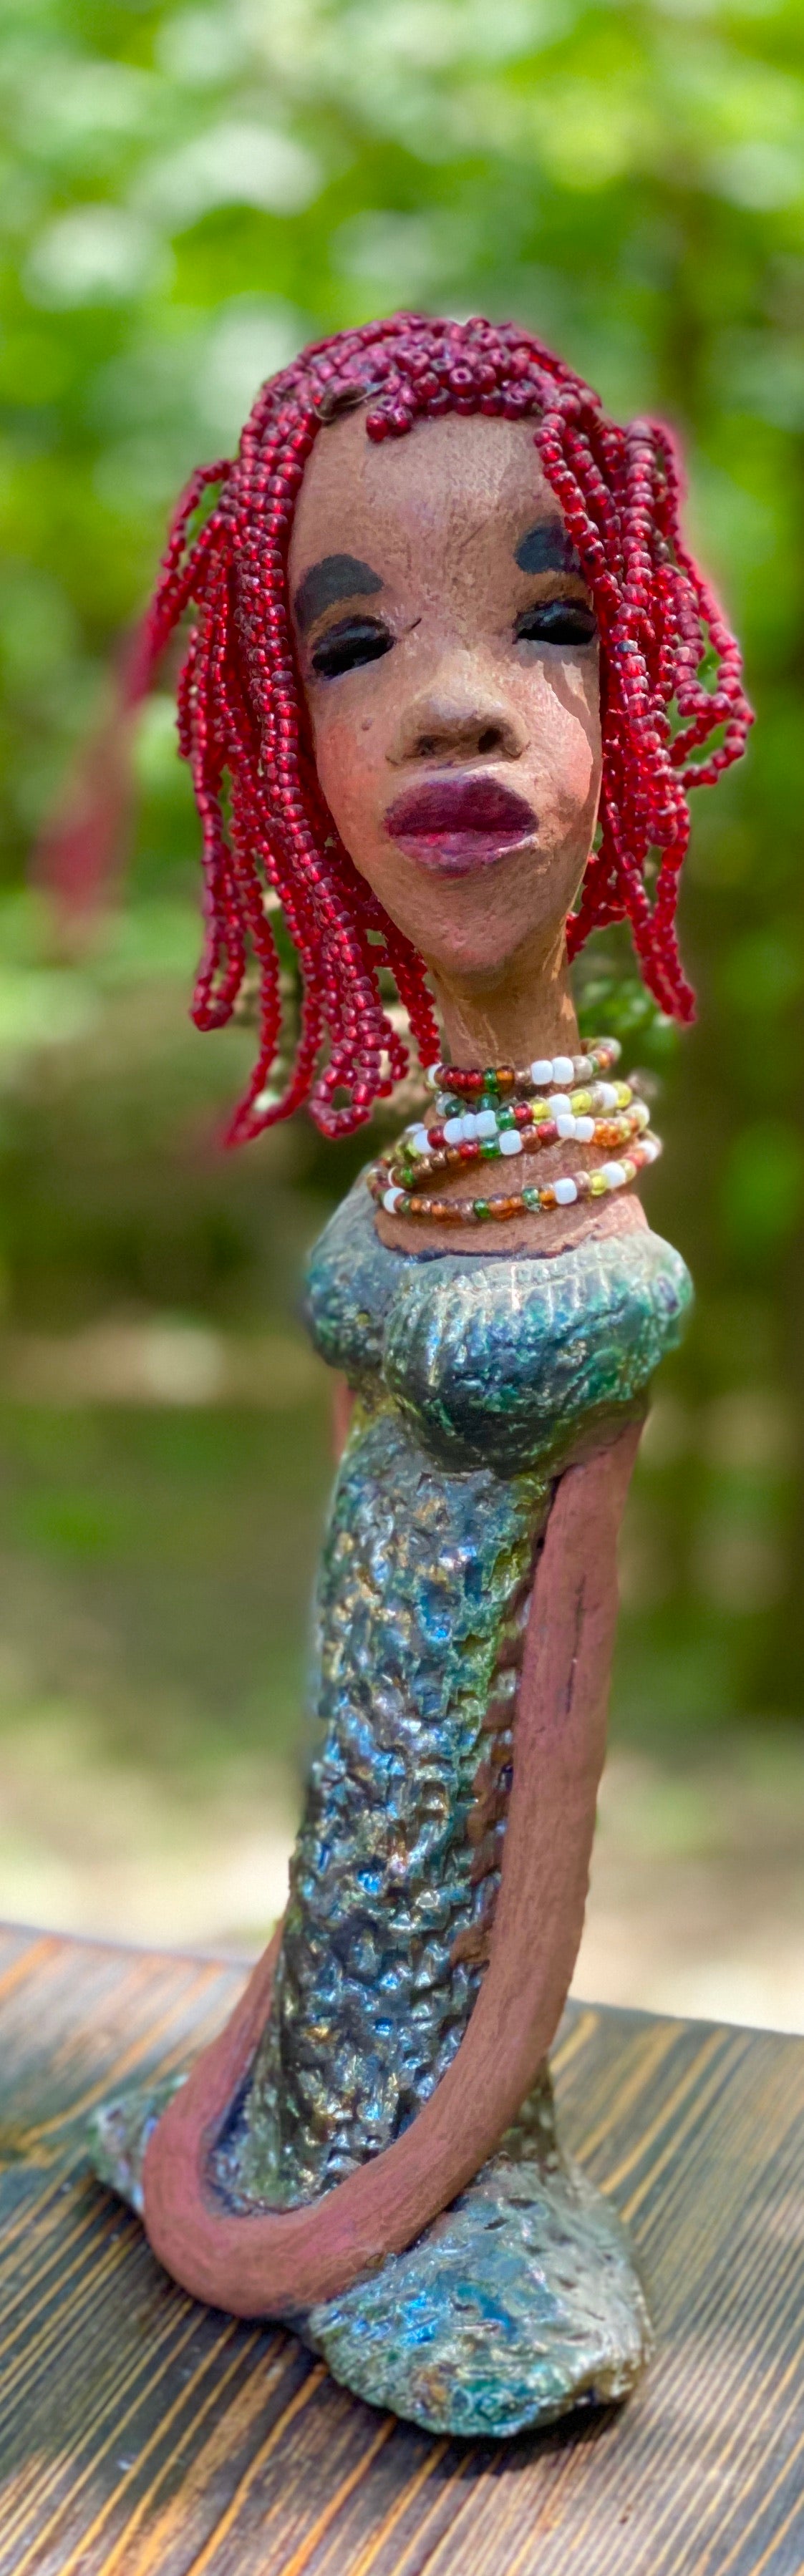 Meet July!﻿﻿ July stands 14" x 5" x 3" and weighs 2.05 lbs. July has a head full of red beaded hair. She has a honey brown complexion. July dress has a metallic textured copper green.  She wears a multi colored beaded necklace. With her head slightly turned her long loving arms gently rest at her side.